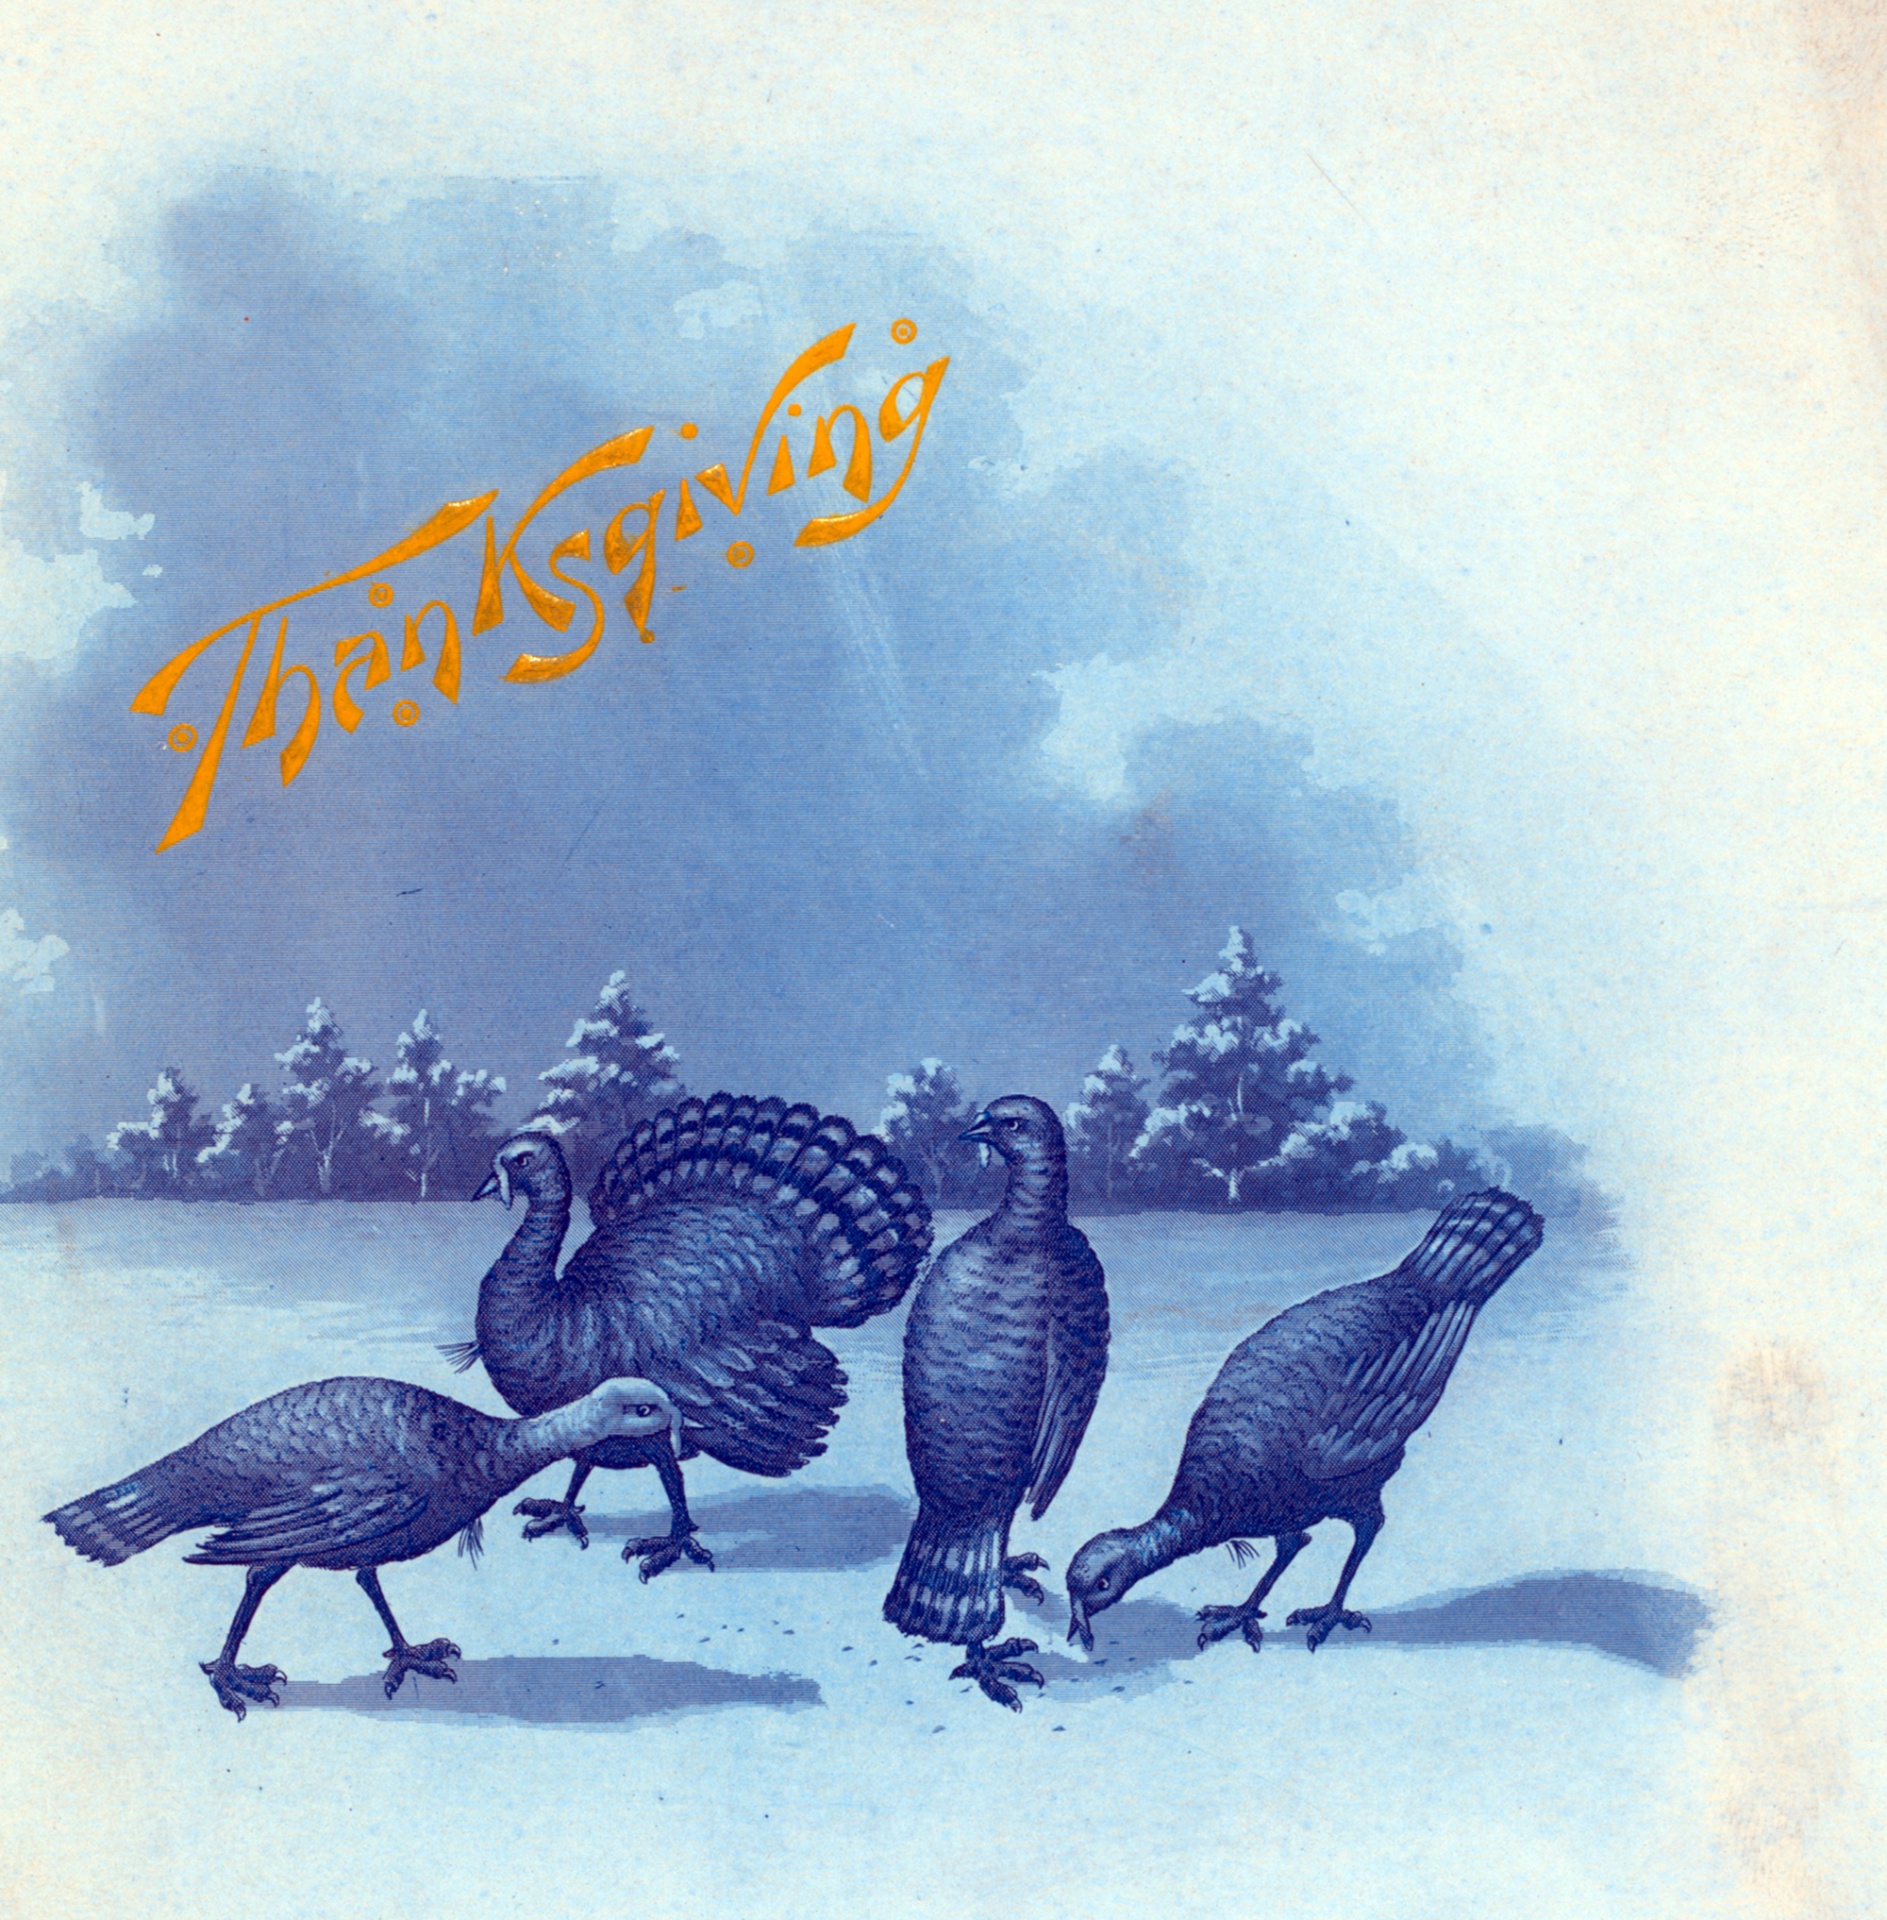 vintage poster for Thanksgiving featuring turkeys